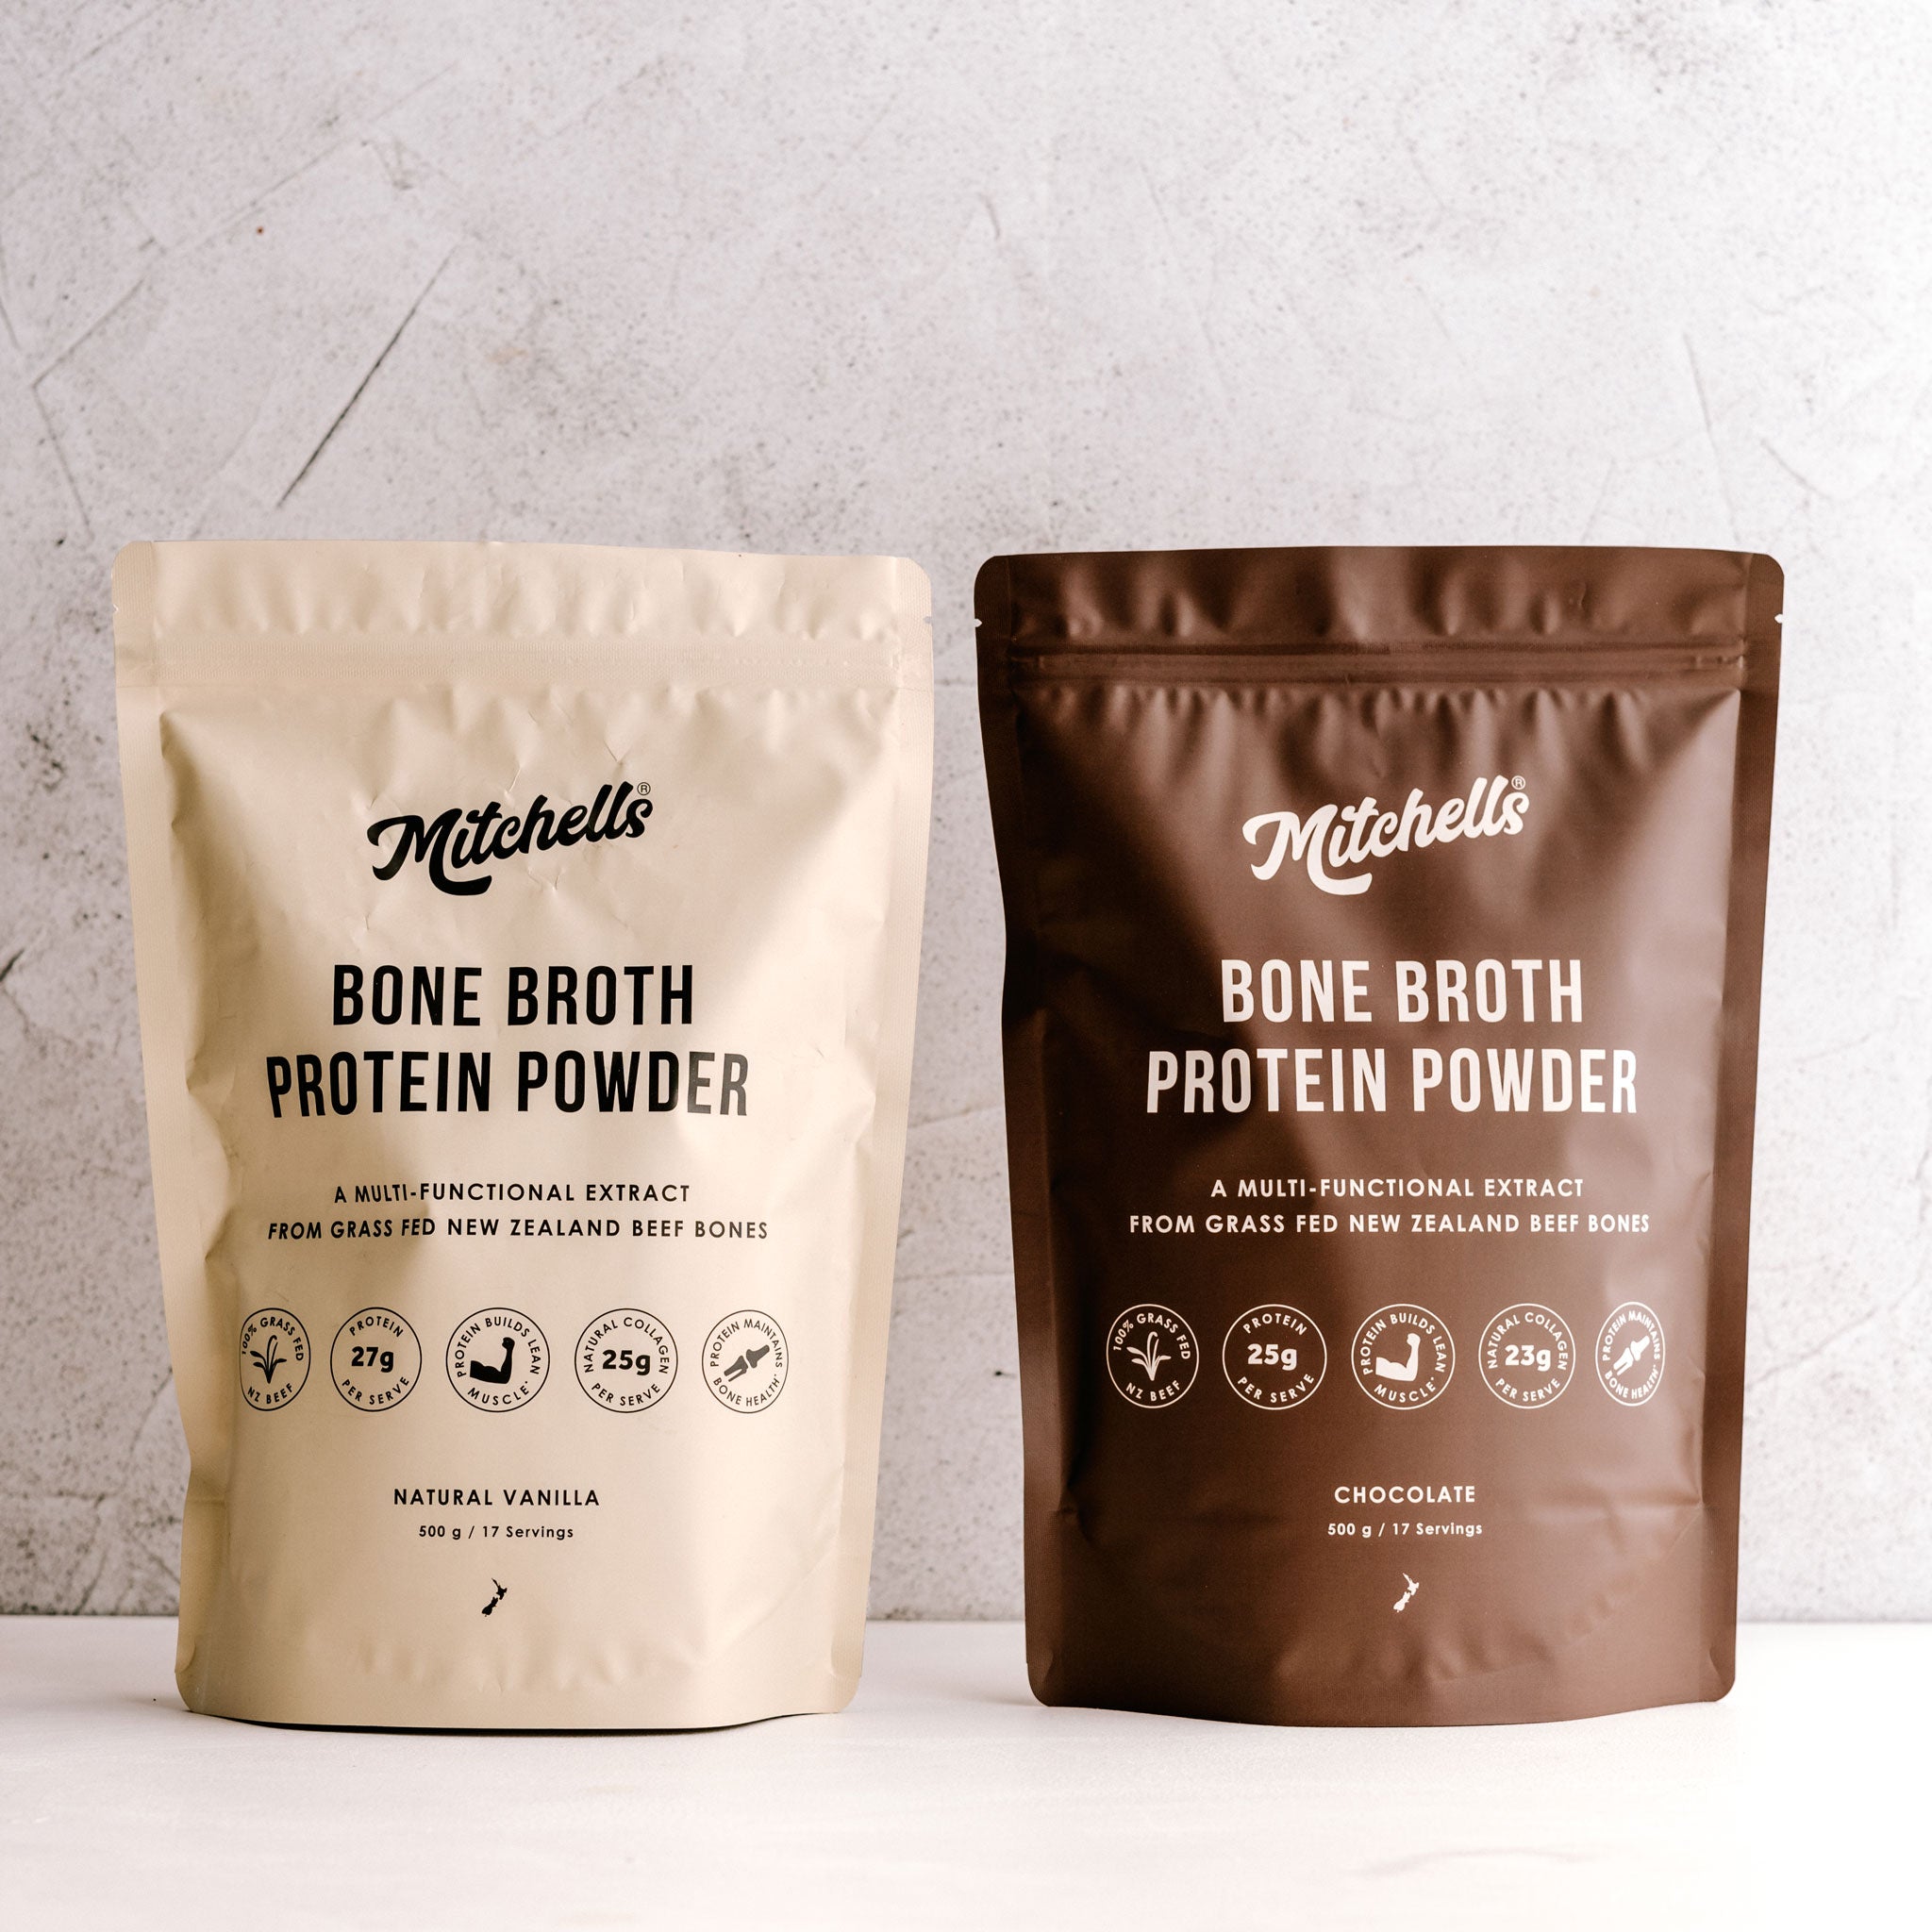 Introducing Our New Bone Broth Protein Powder